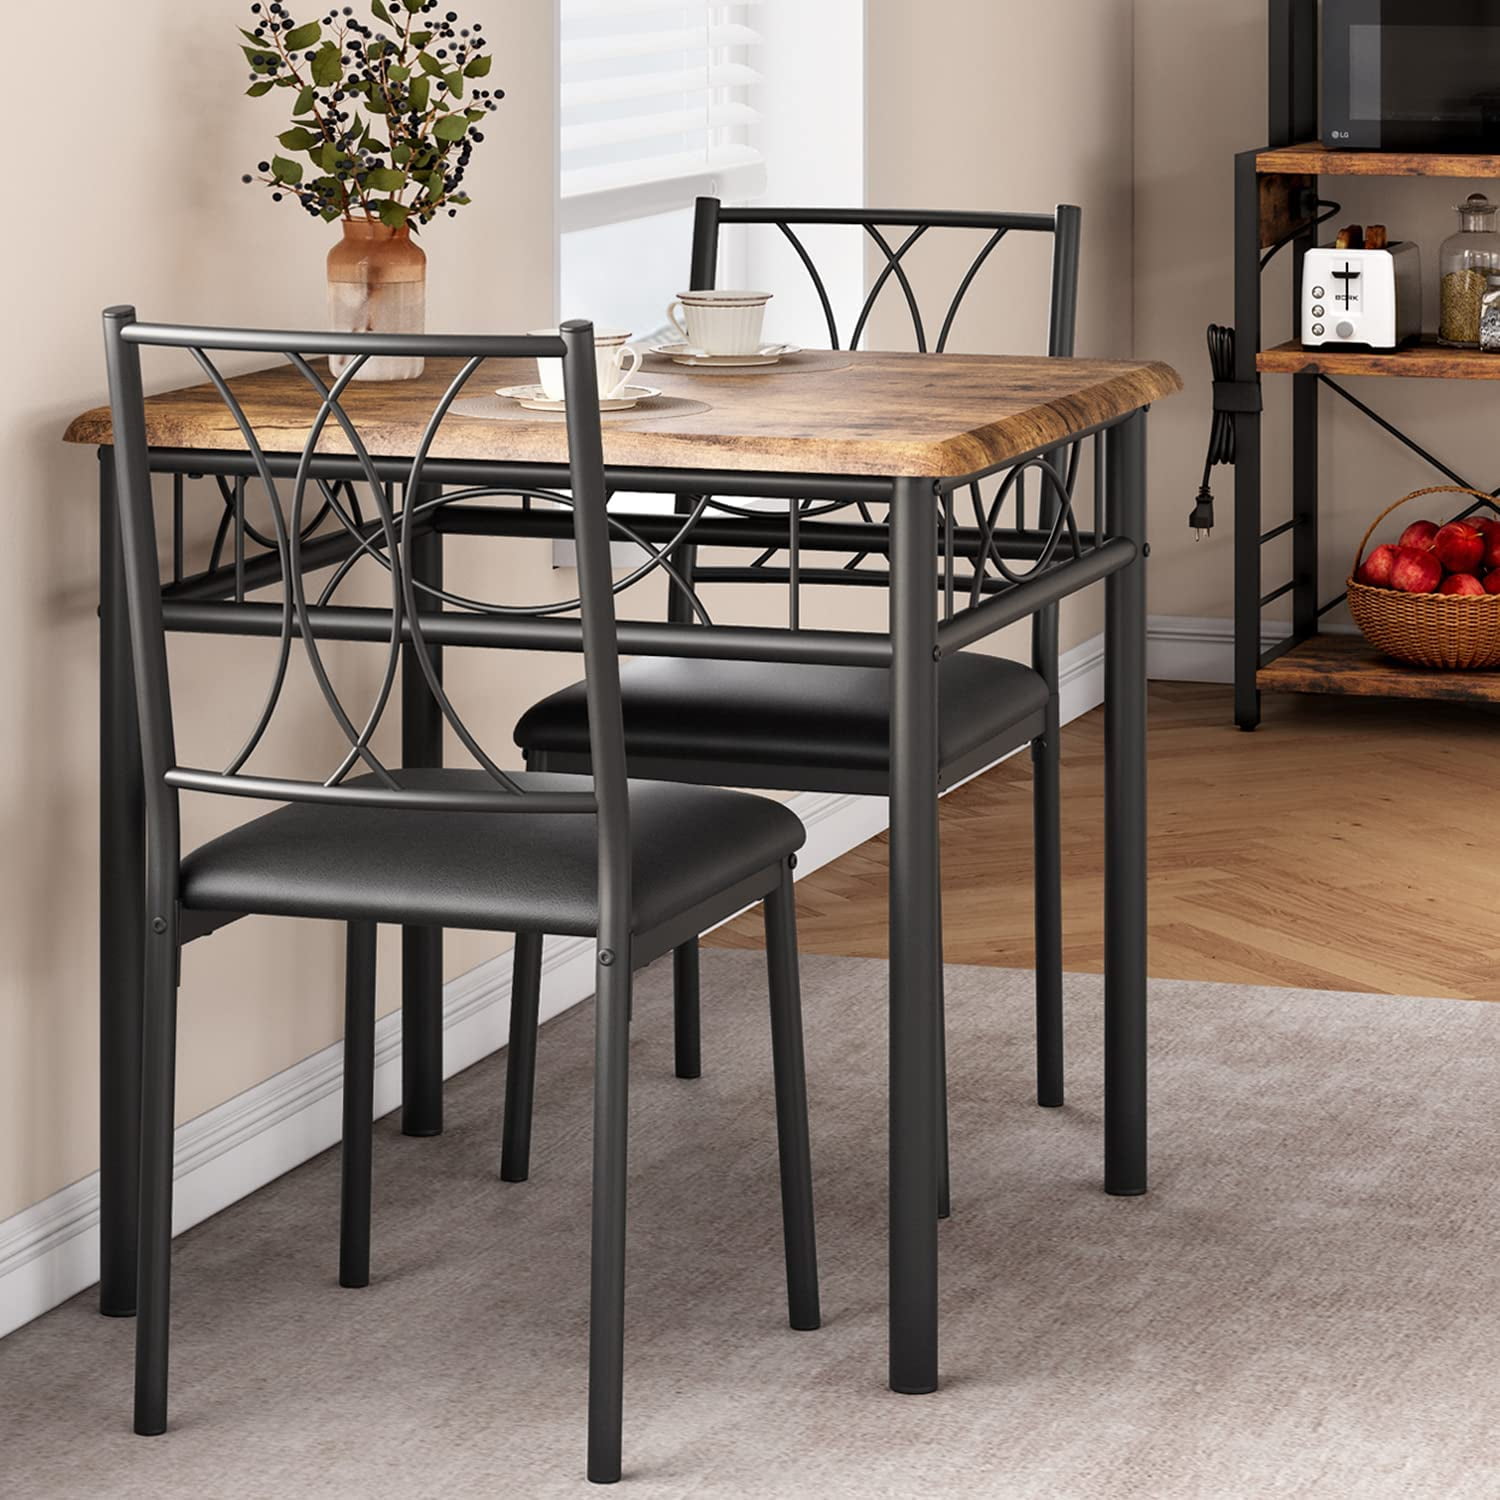 3 Piece Kitchen Table Set, Dining Table and Chairs for 2, Metal and ...